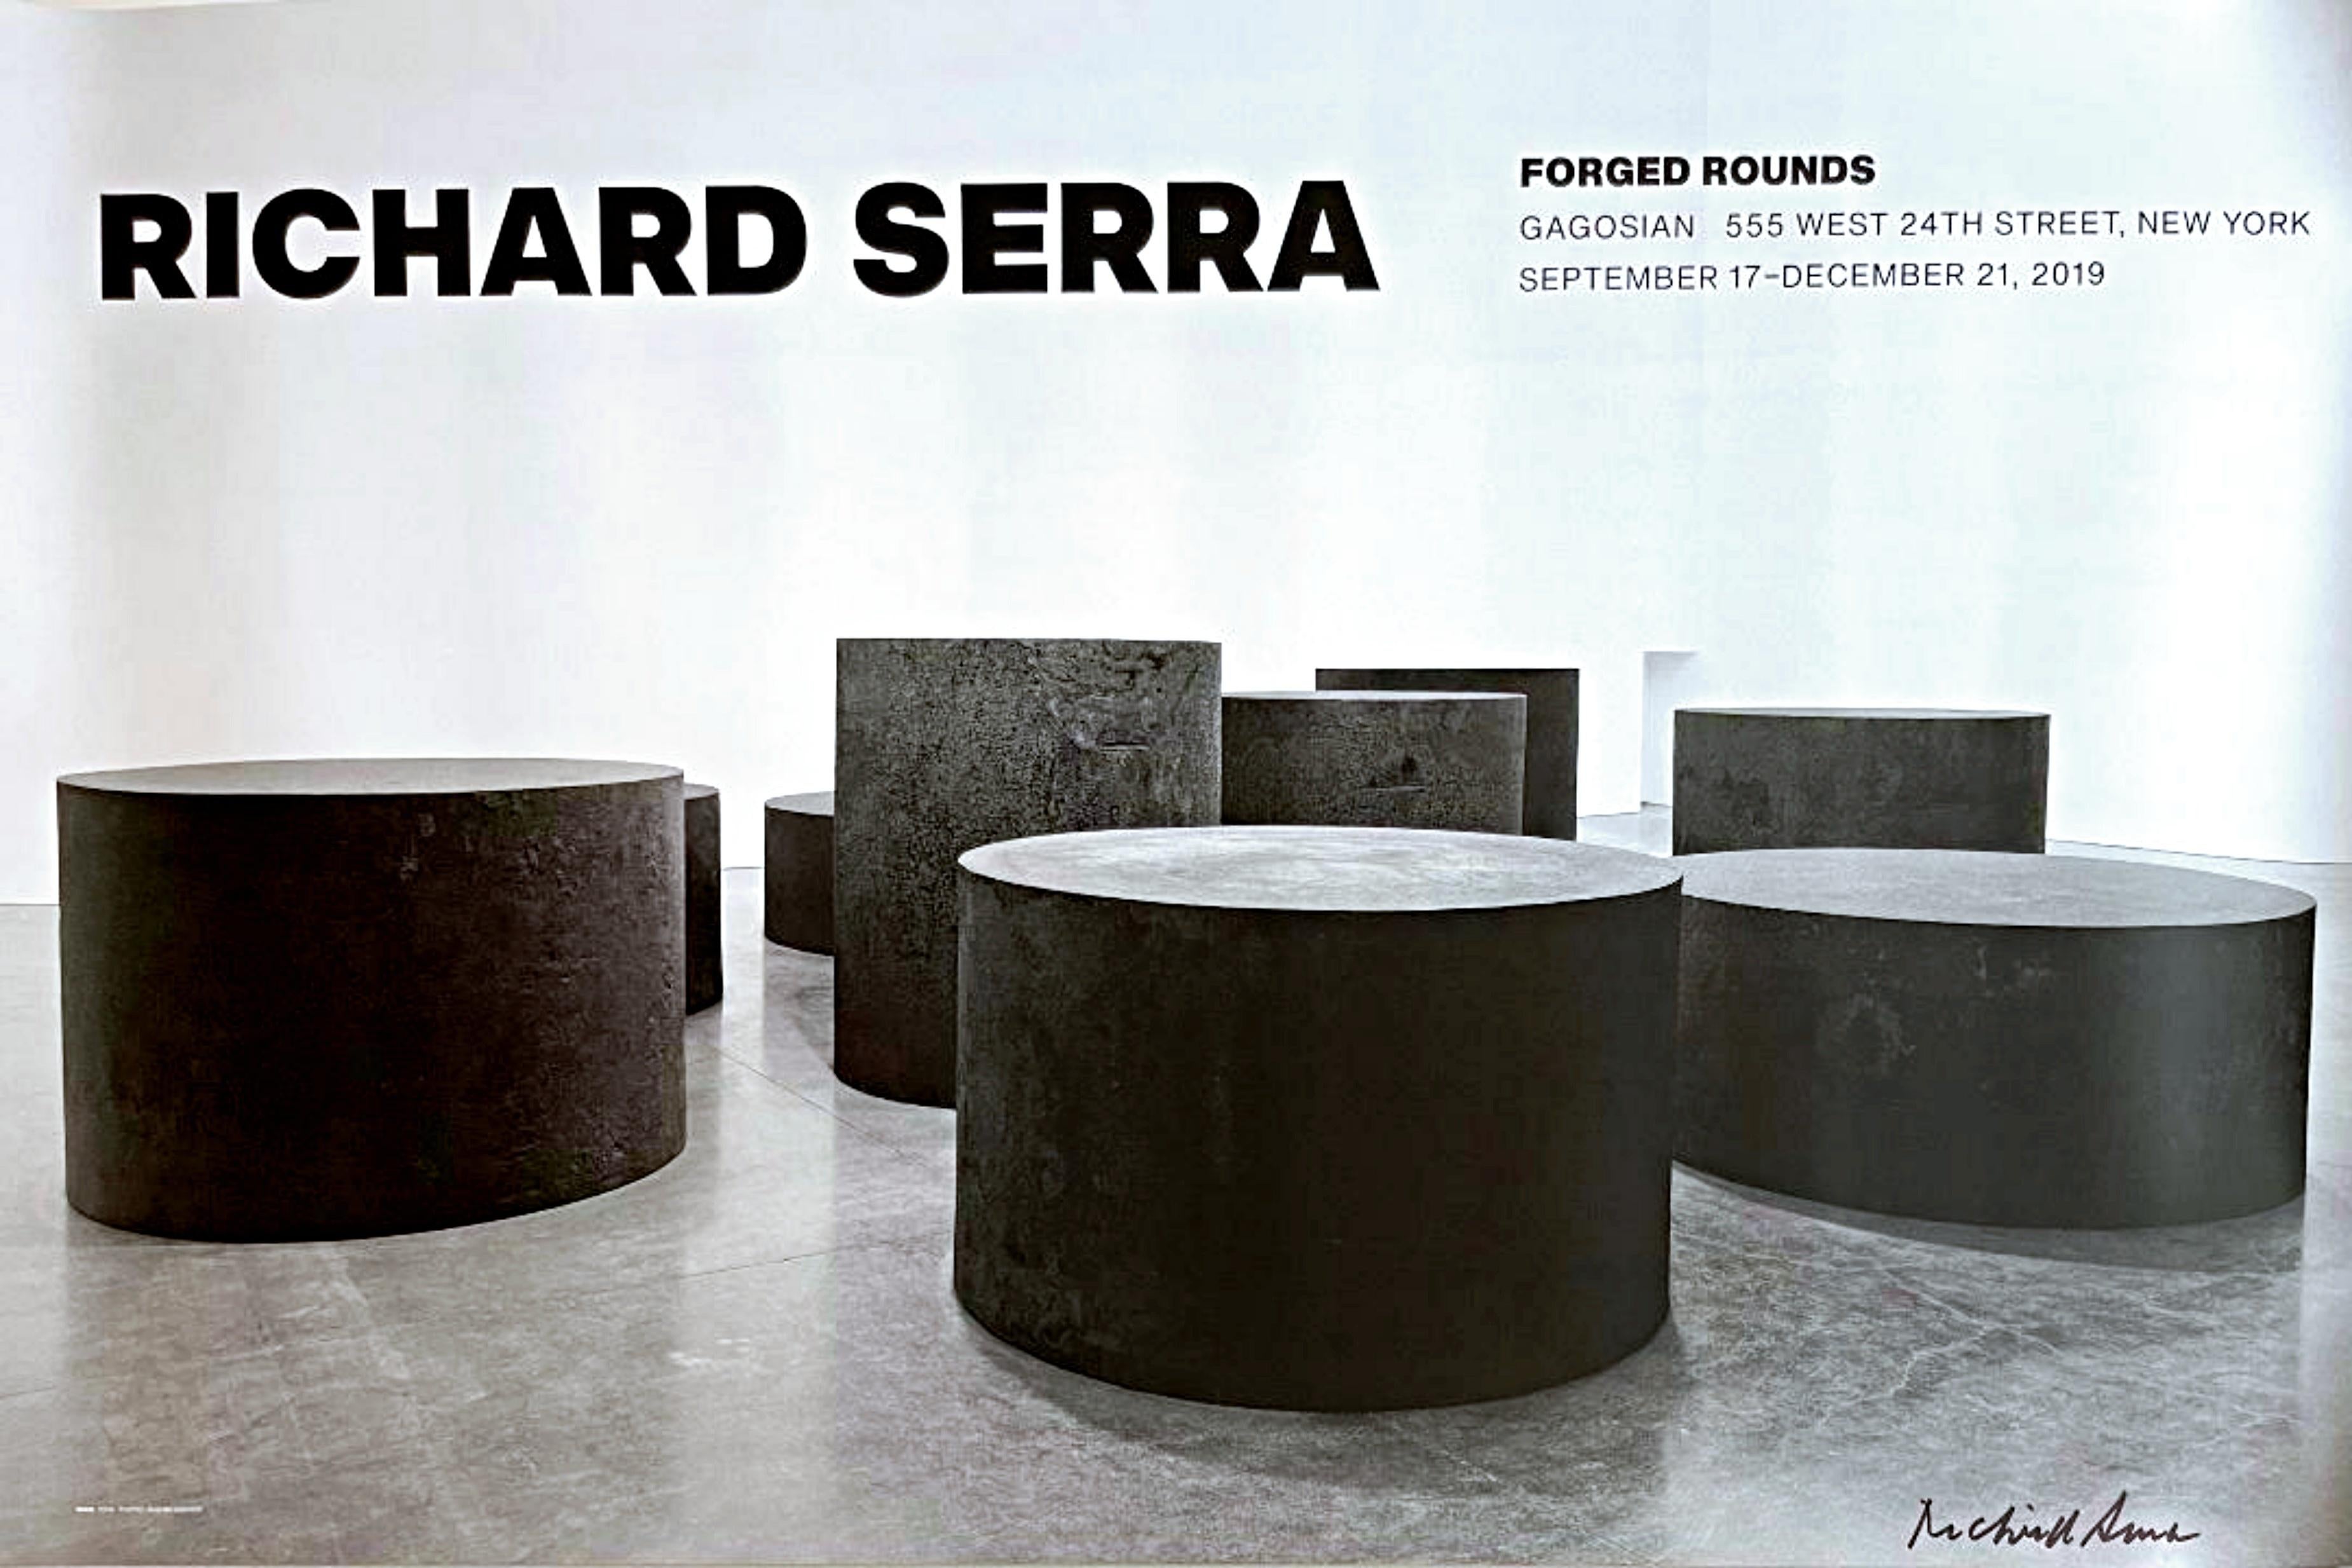 Richard Serra
Forged Rounds (hand signed), 2019
Offset lithograph poster (hand signed by Richard Serra)
26 × 40 inches
Boldly signed in black marker on the front by Richard Serra
Unframed
Acquired from Gagosian Gallery, New York City

From Gagosian